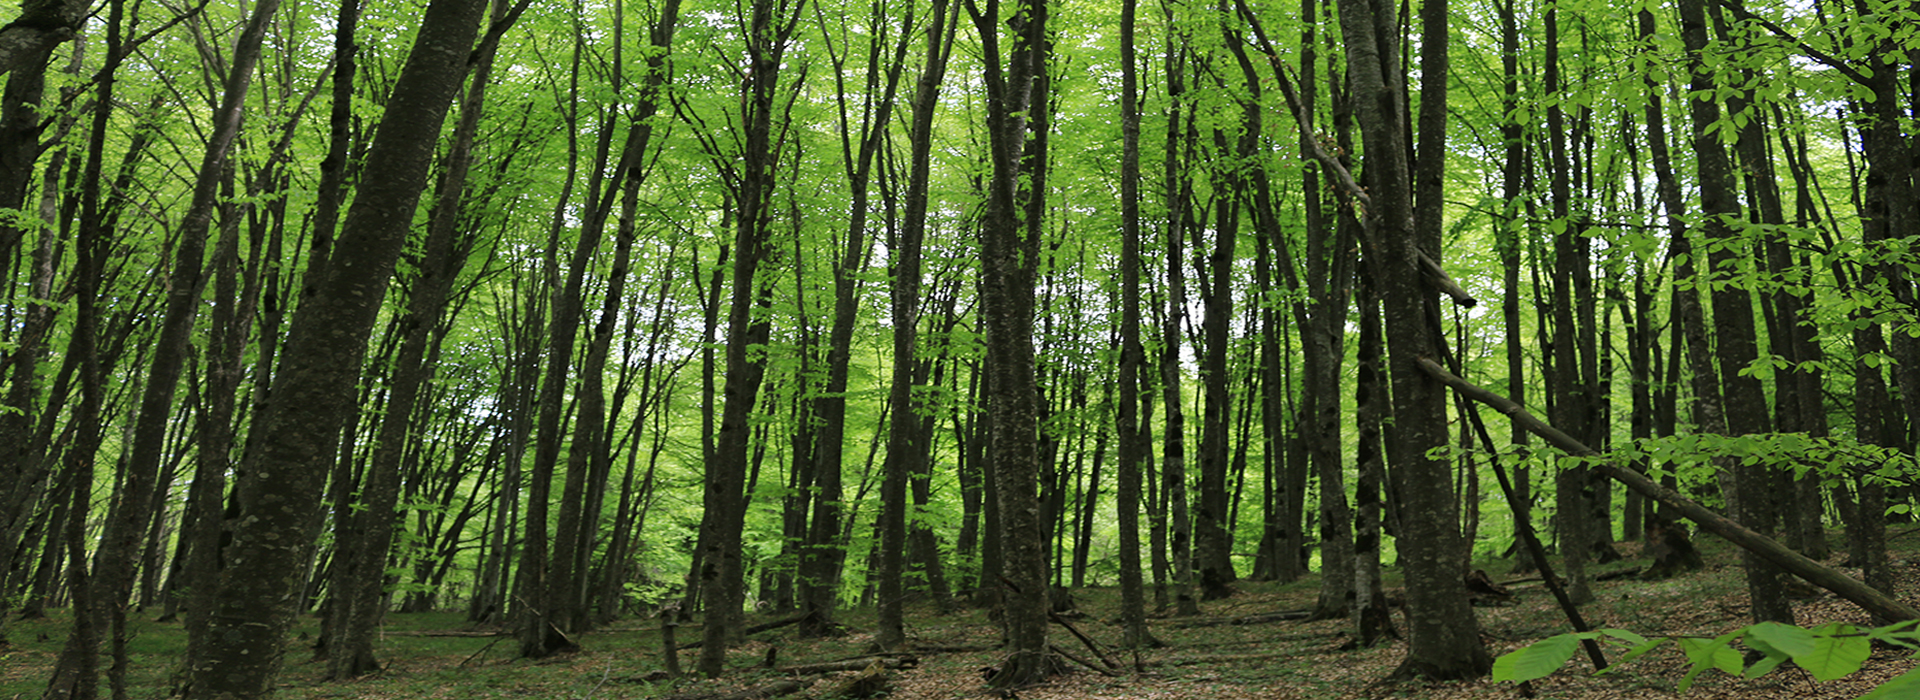 Young beech trees in a Georgian forest.